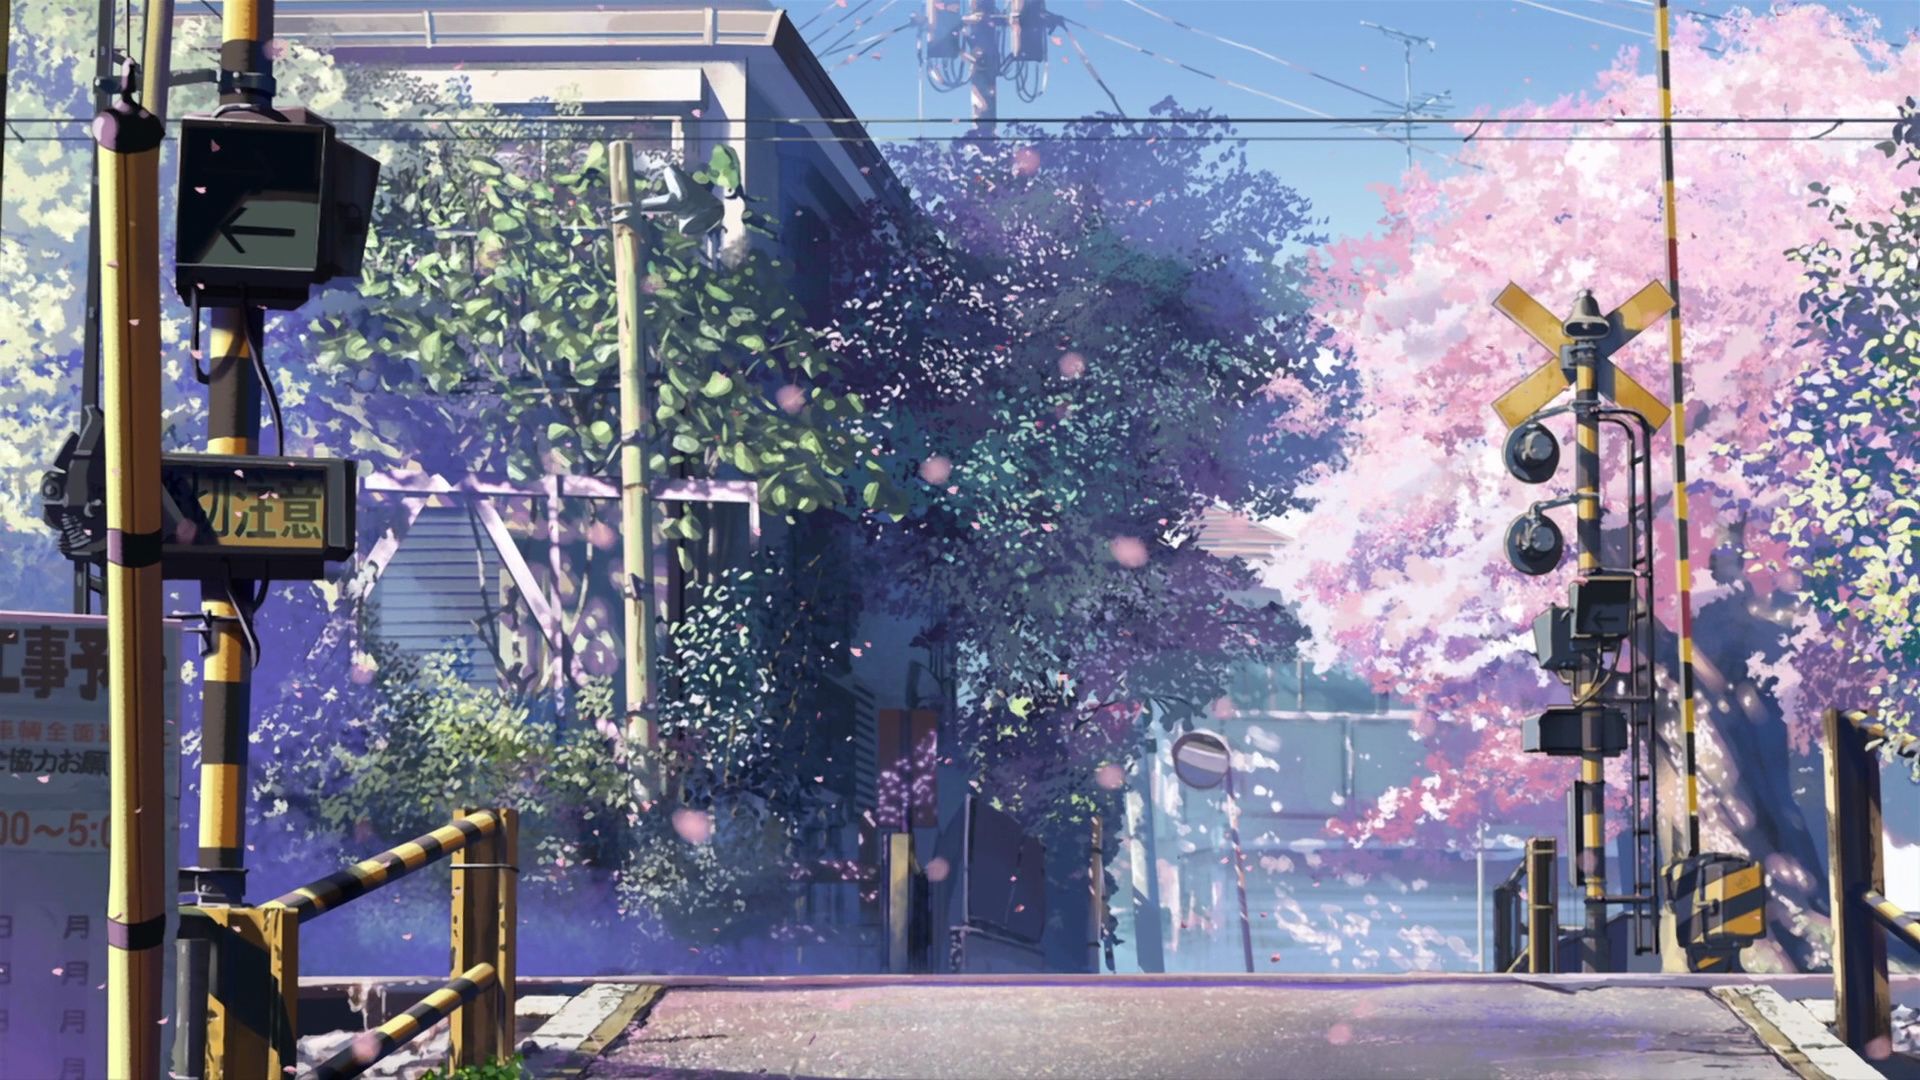 106 5 Centimeters Per Second HD Wallpapers | Backgrounds ...